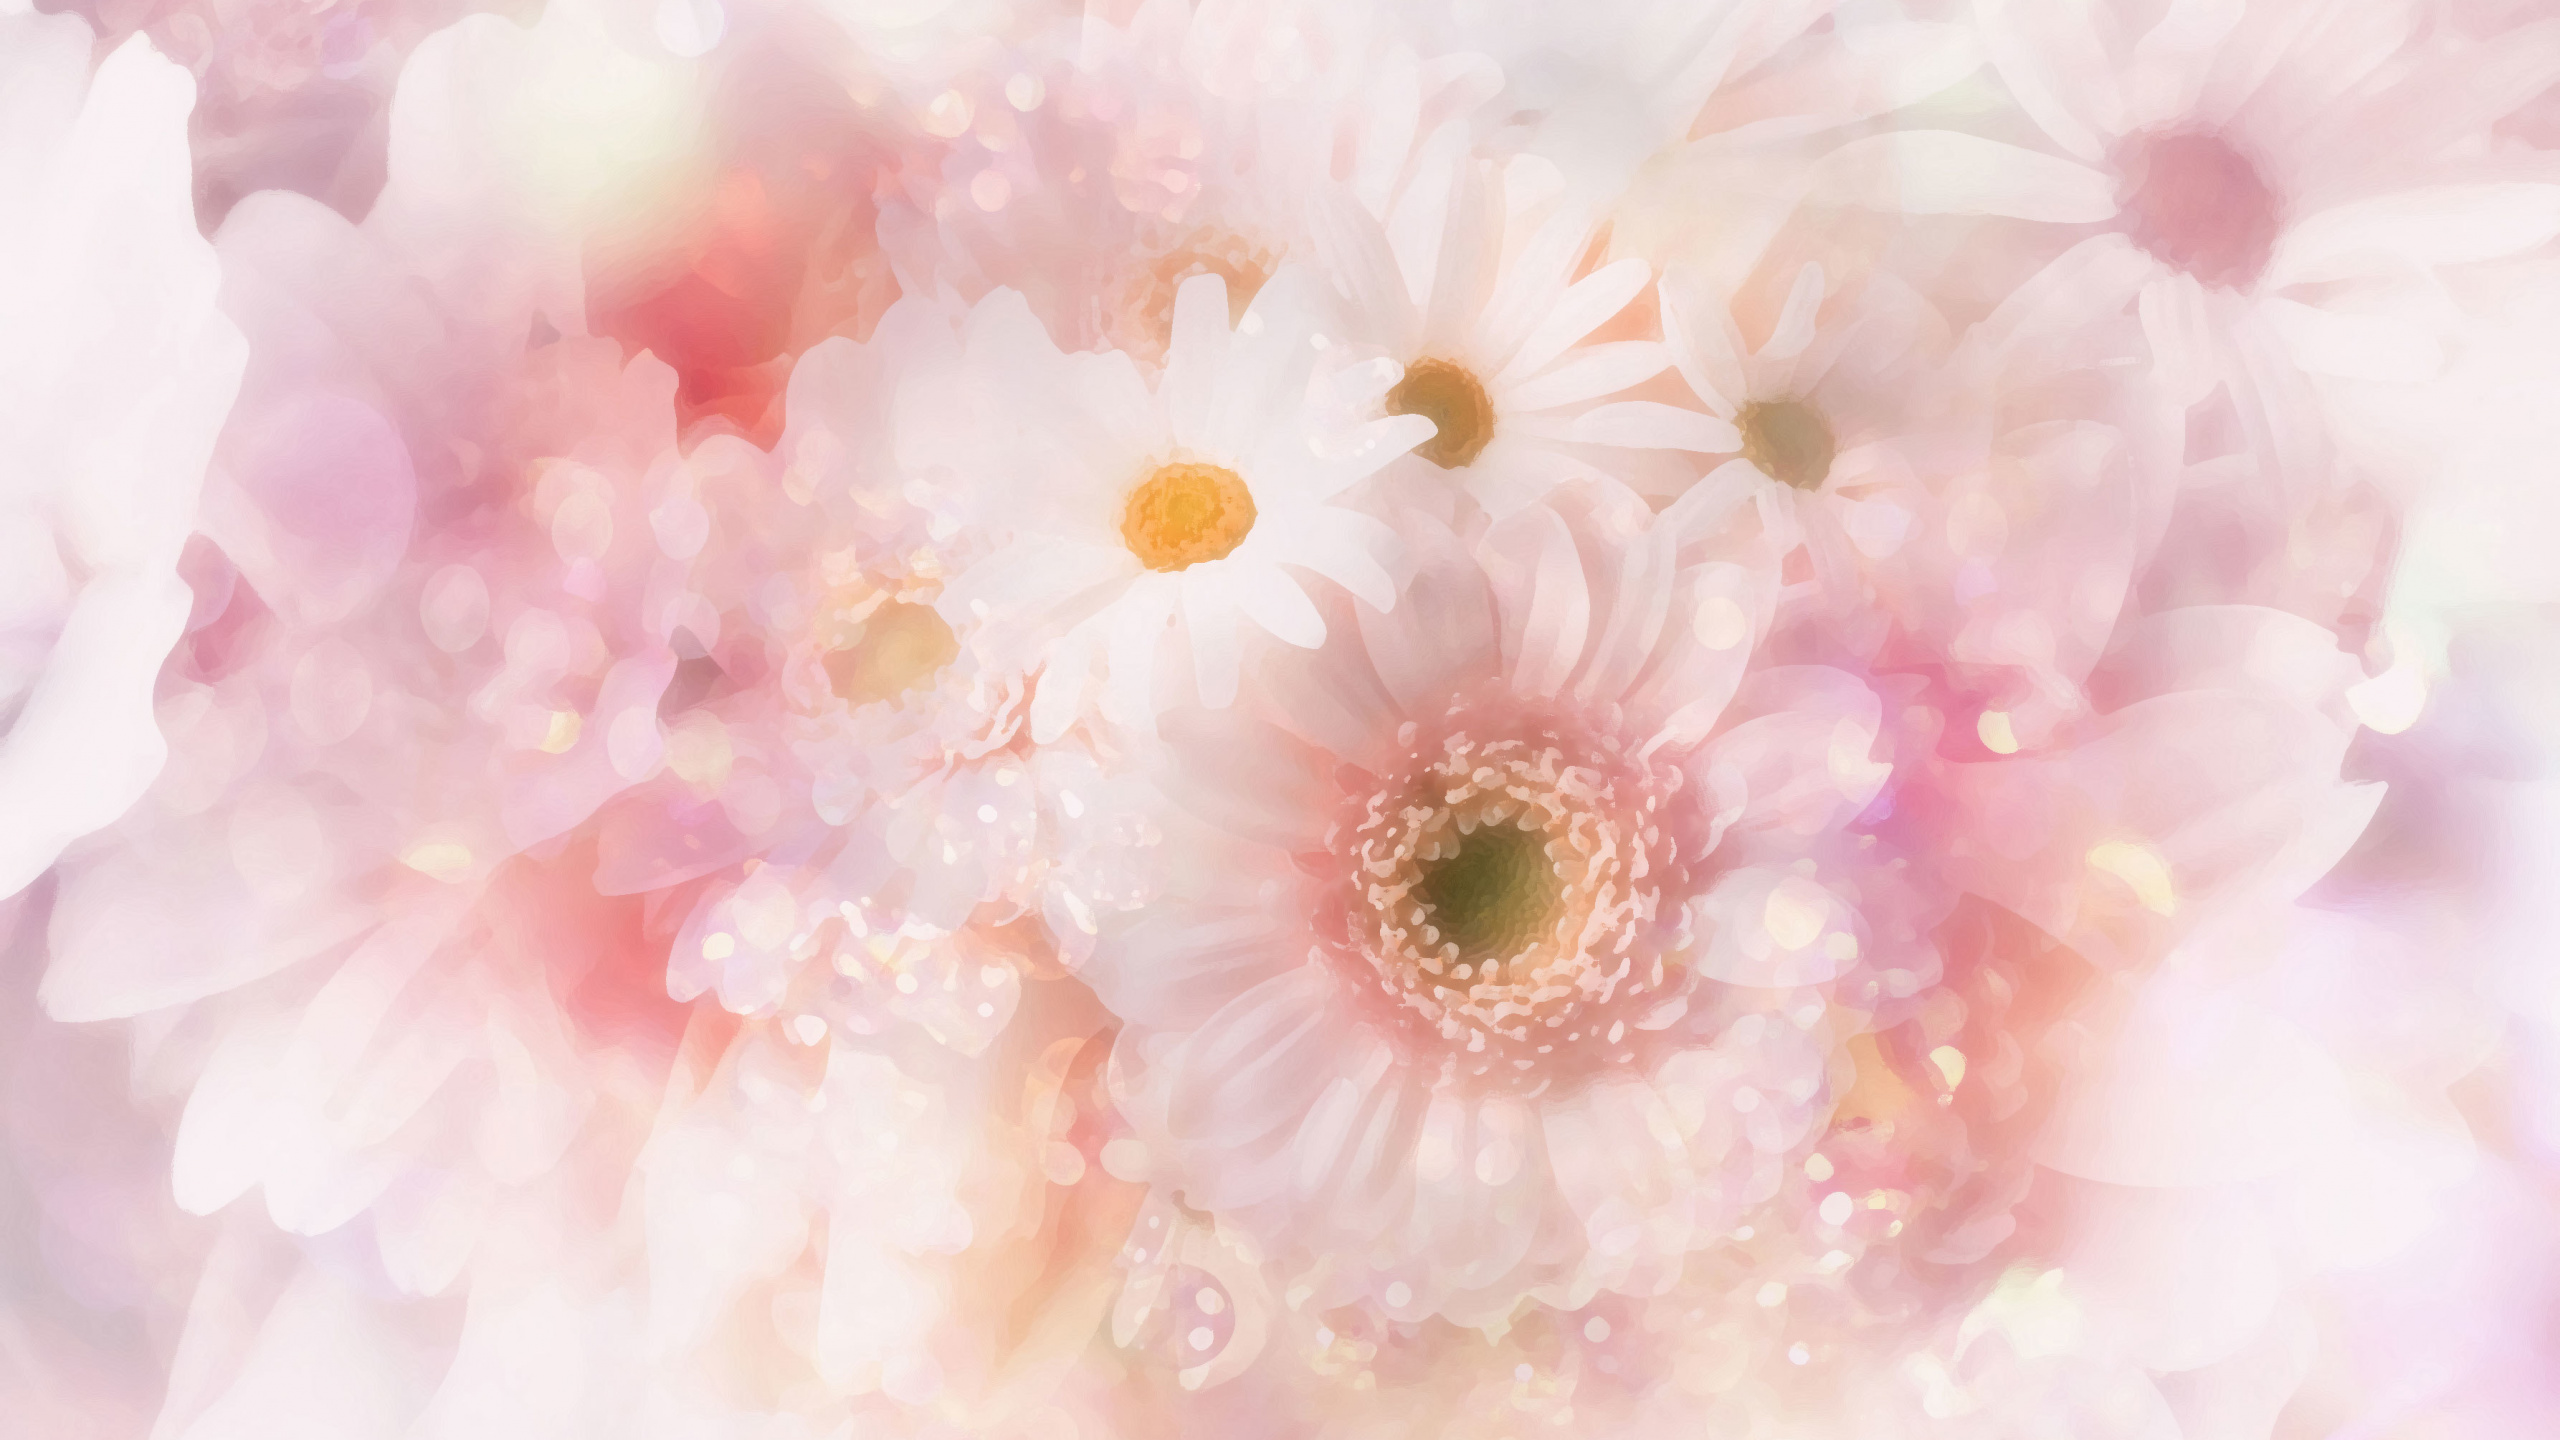 White and Pink Daisy Flower. Wallpaper in 2560x1440 Resolution